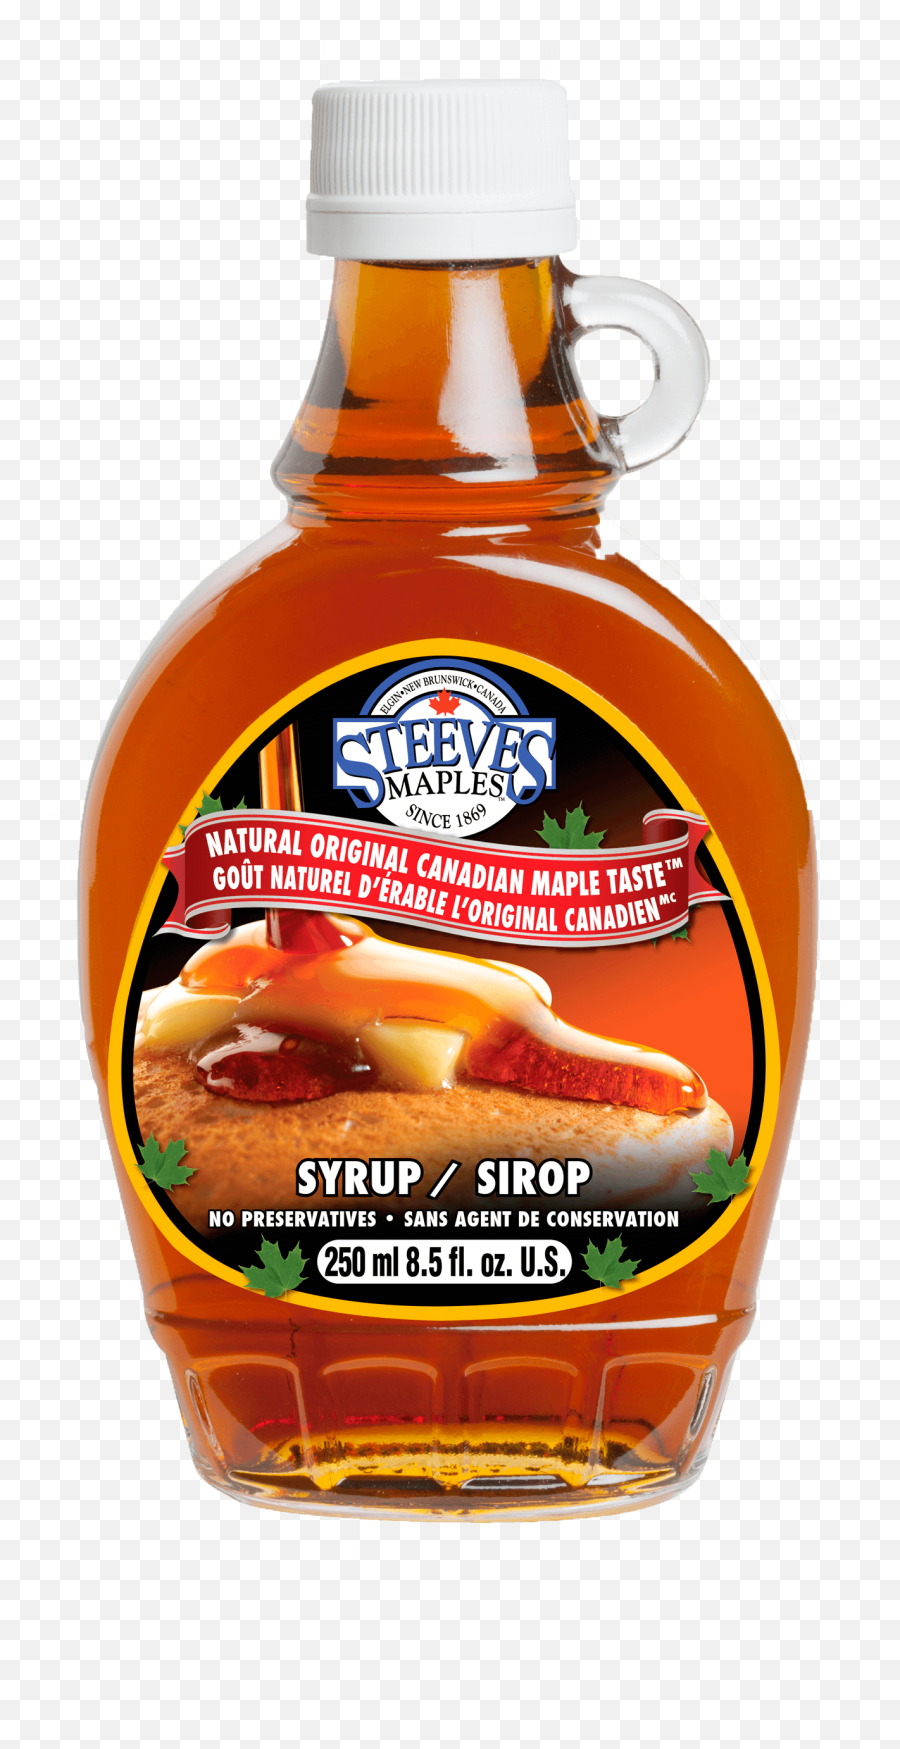 Download Of Maple Flavoured Products - Steeves Maple Syrup 250ml Png,Maple Syrup Png